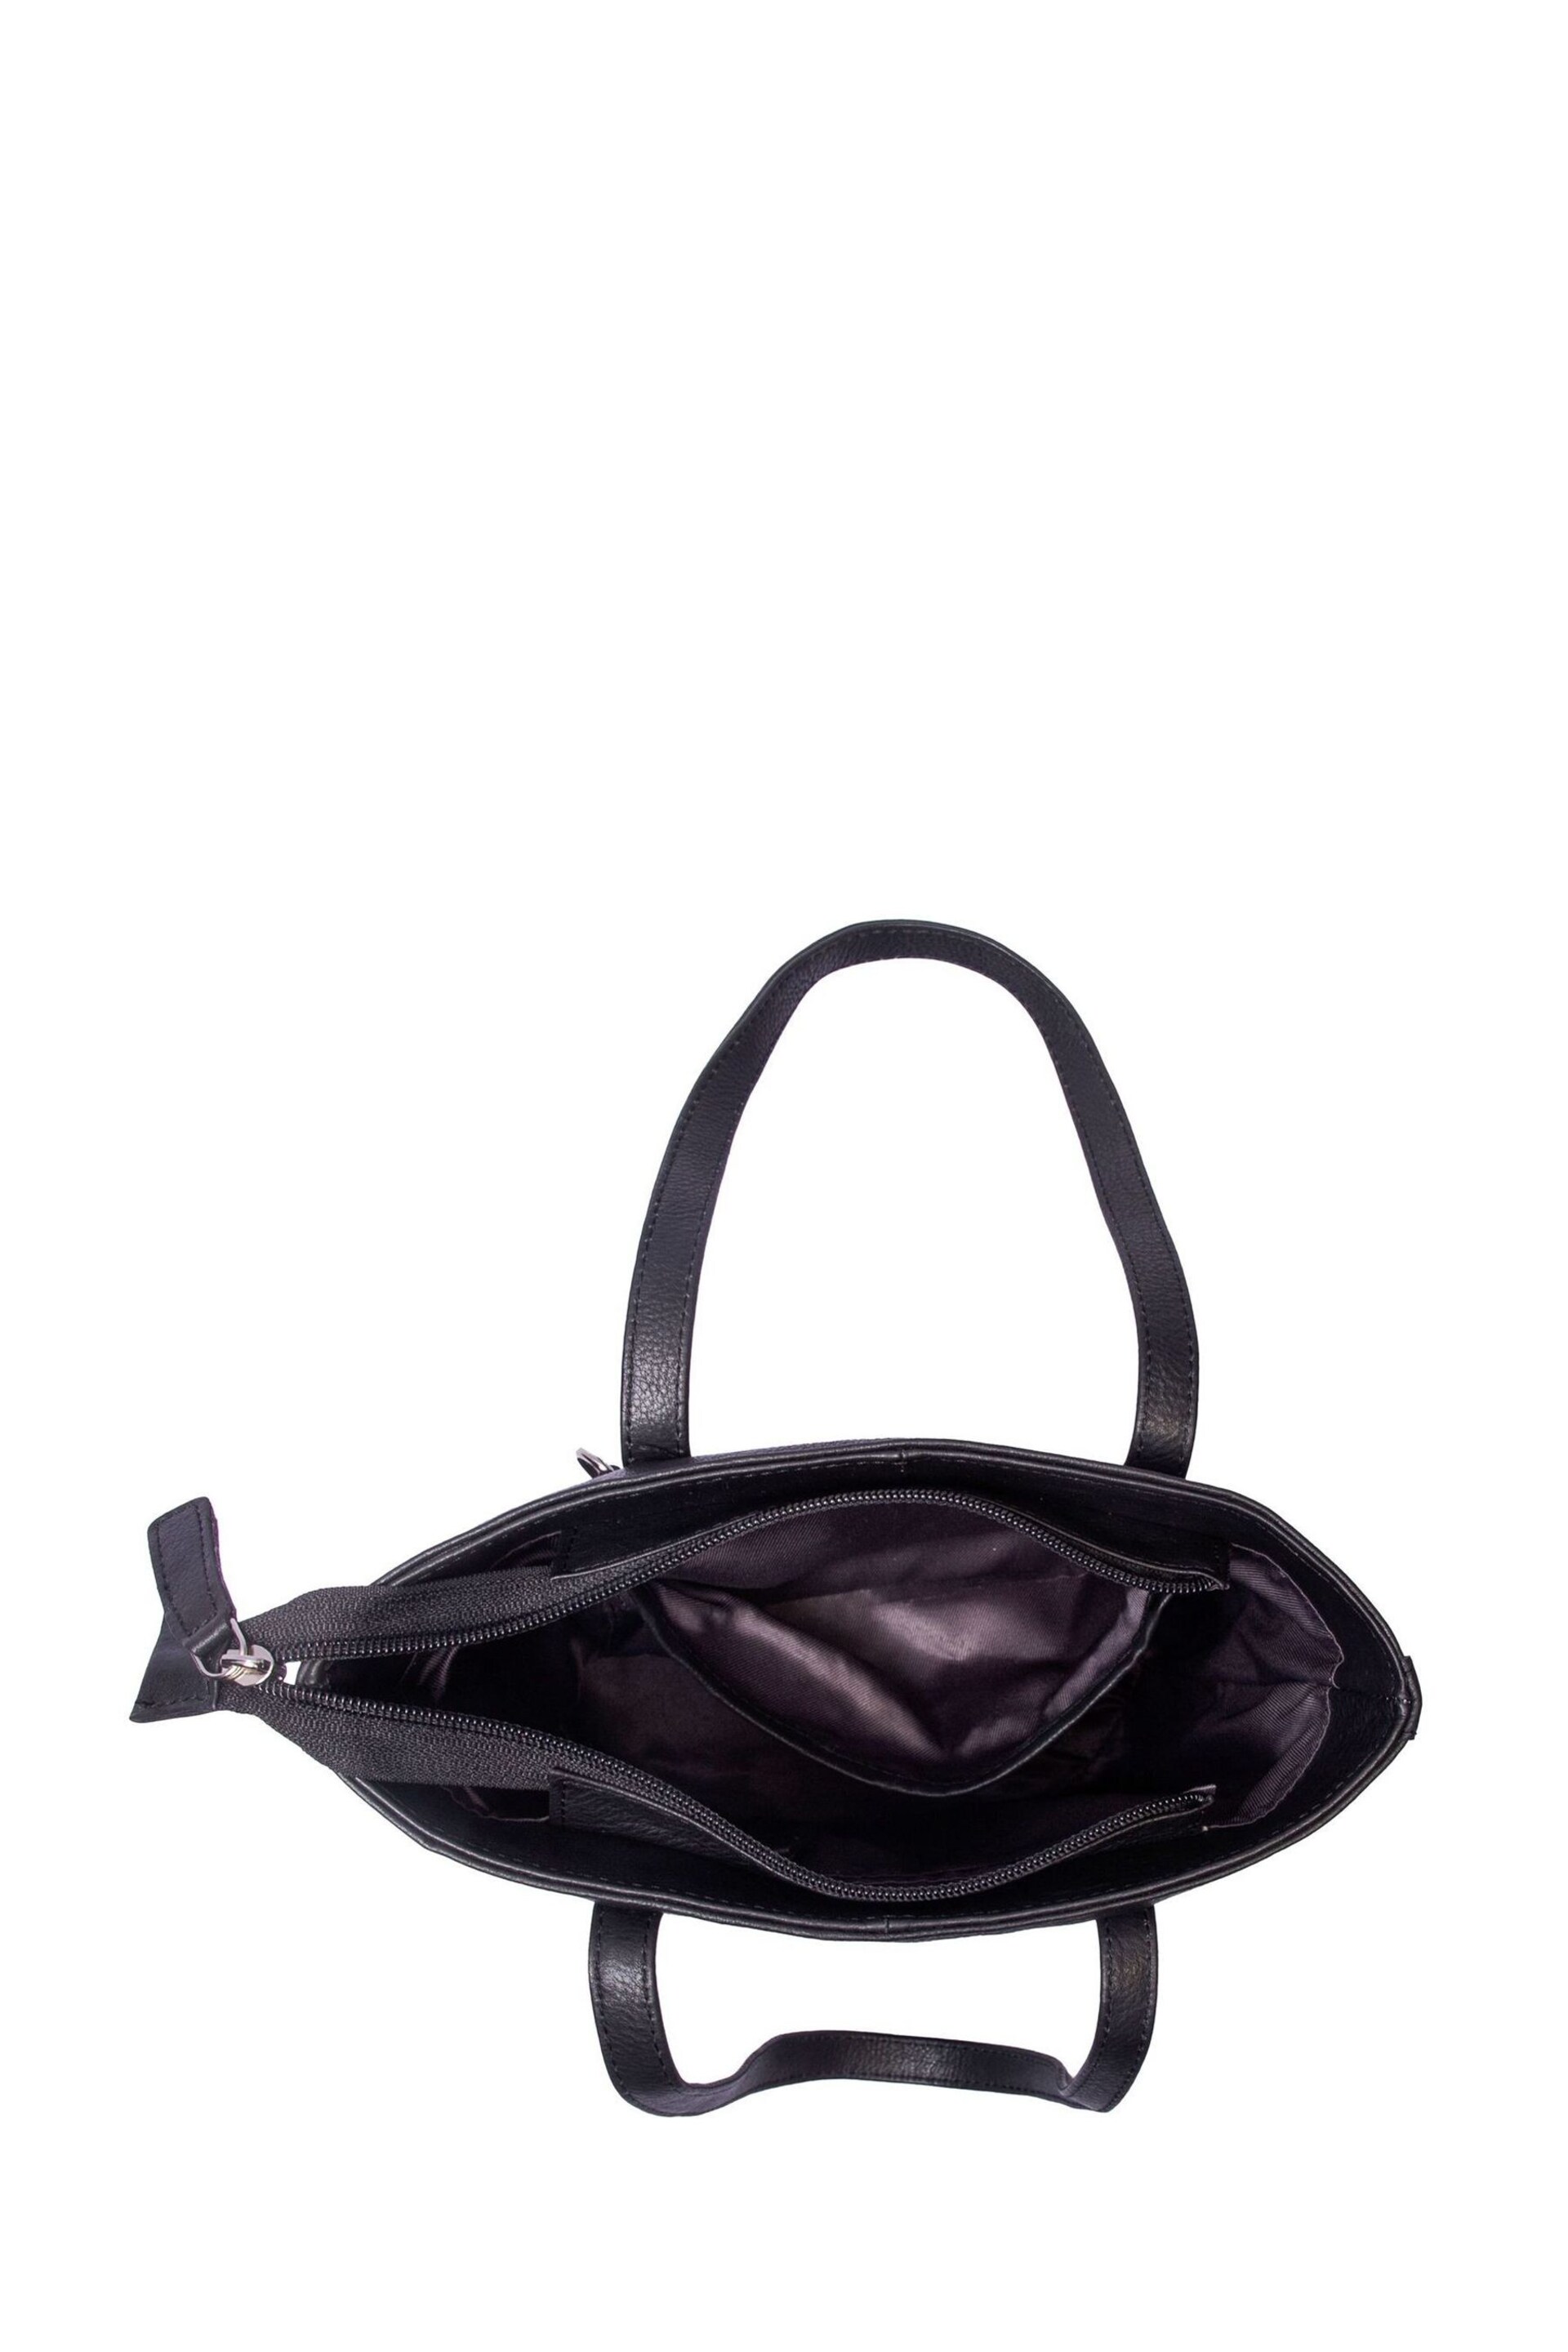 Storm Elettra Leather Bucket Grab Bag - Image 5 of 5